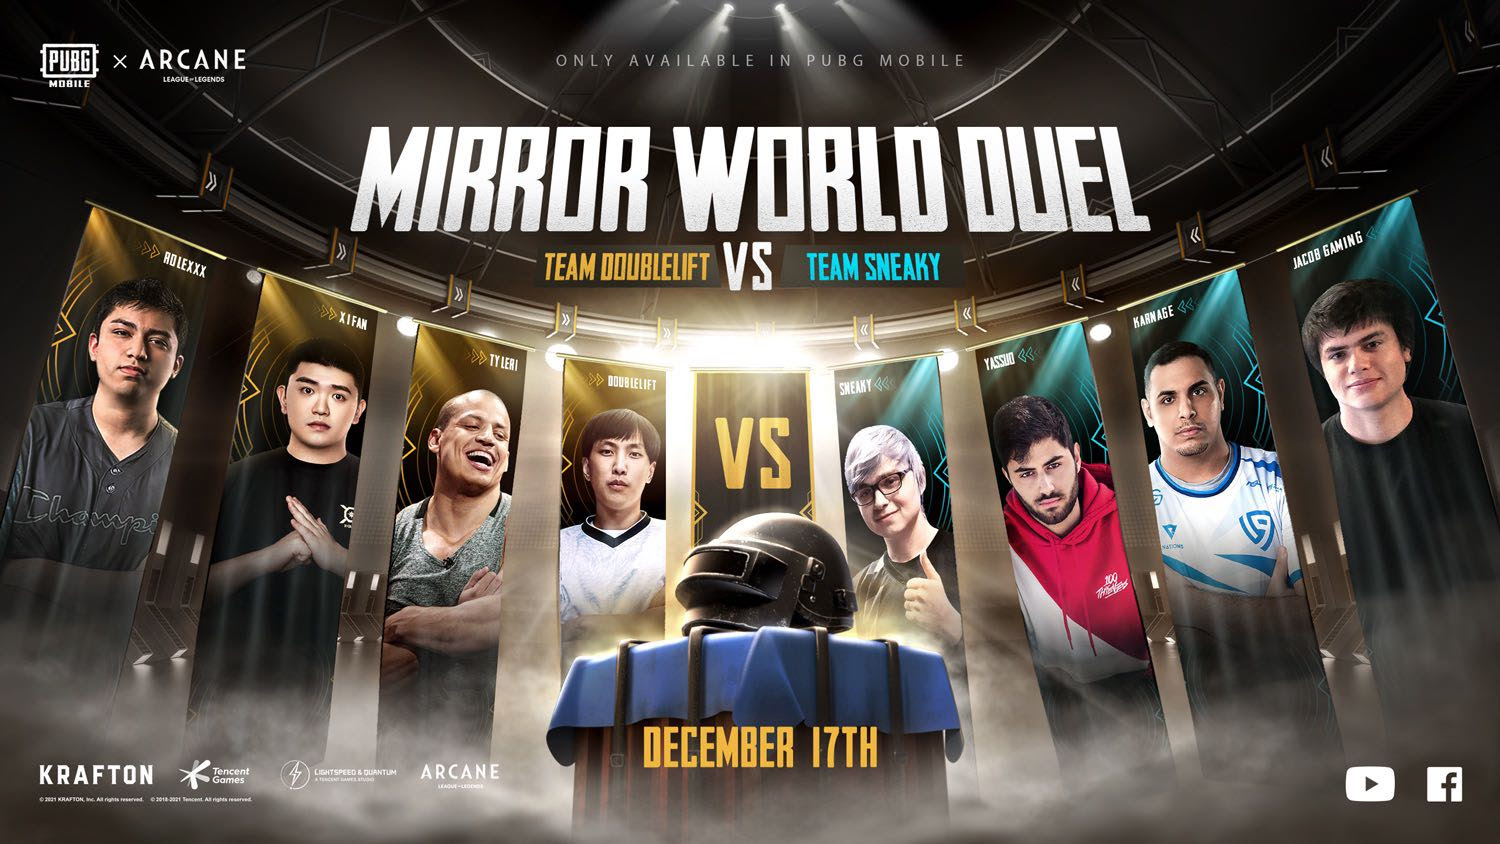 sneaky and doublelift will face each other in pubg mobile's arcane themed event